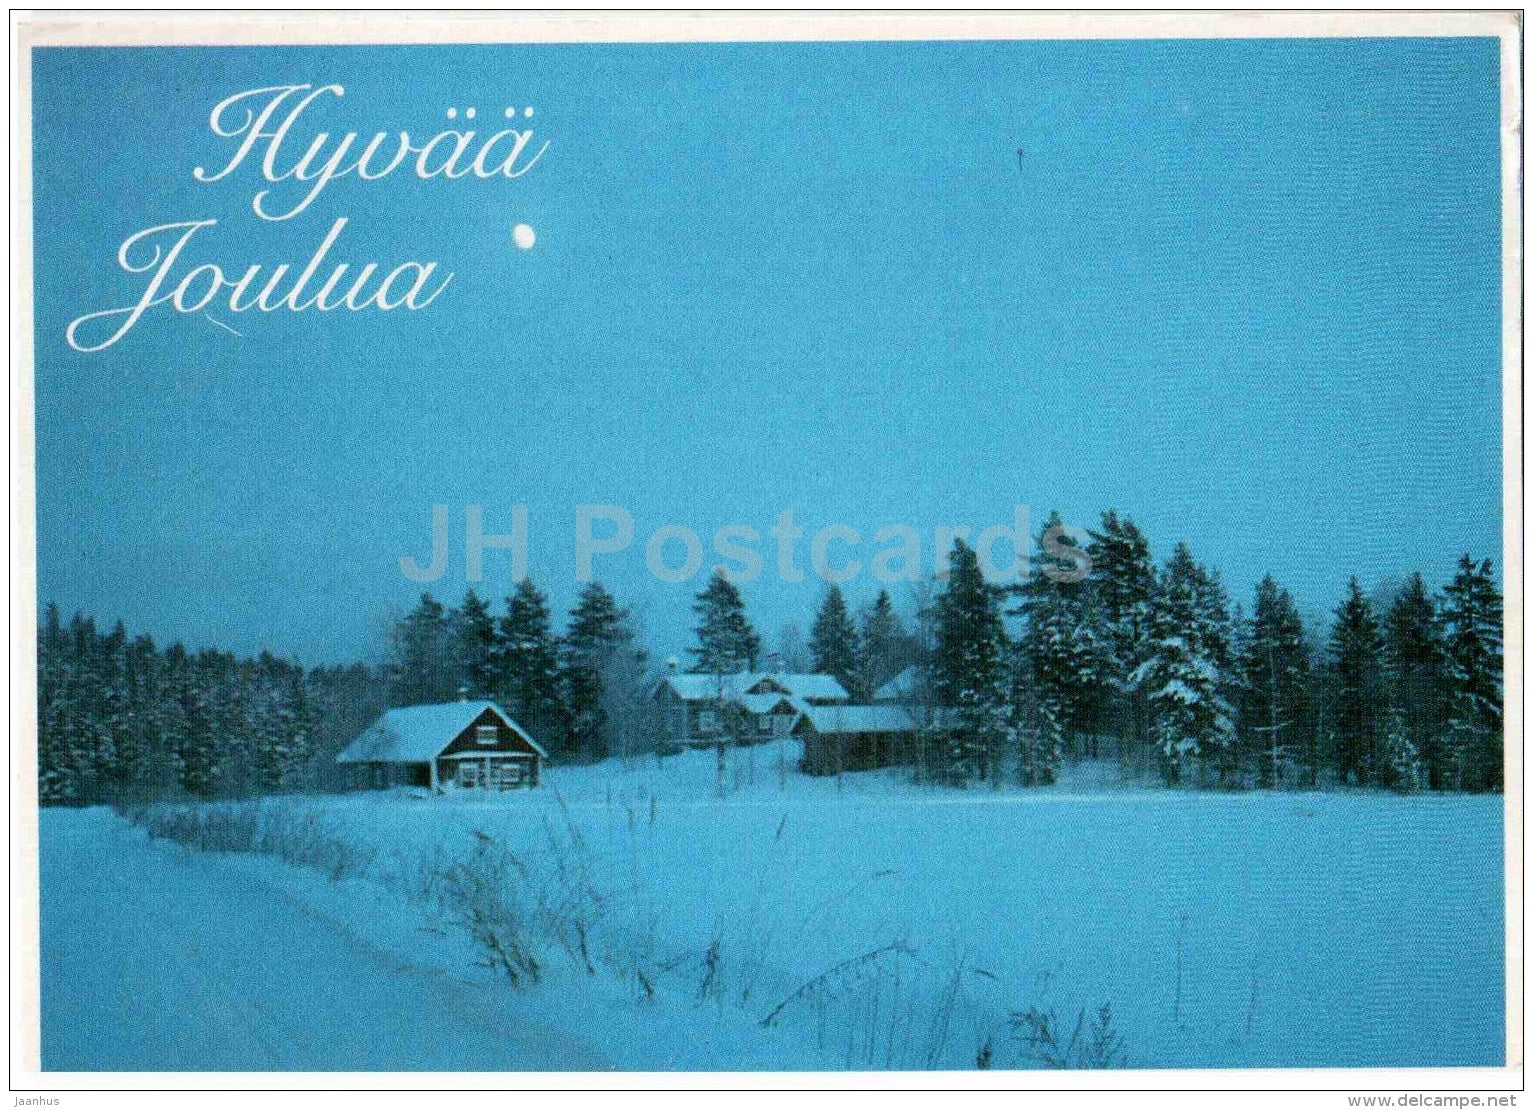 Christmas greeting card - winter view - house - buckthorn stamp - Finland - circulated in 1994 - JH Postcards